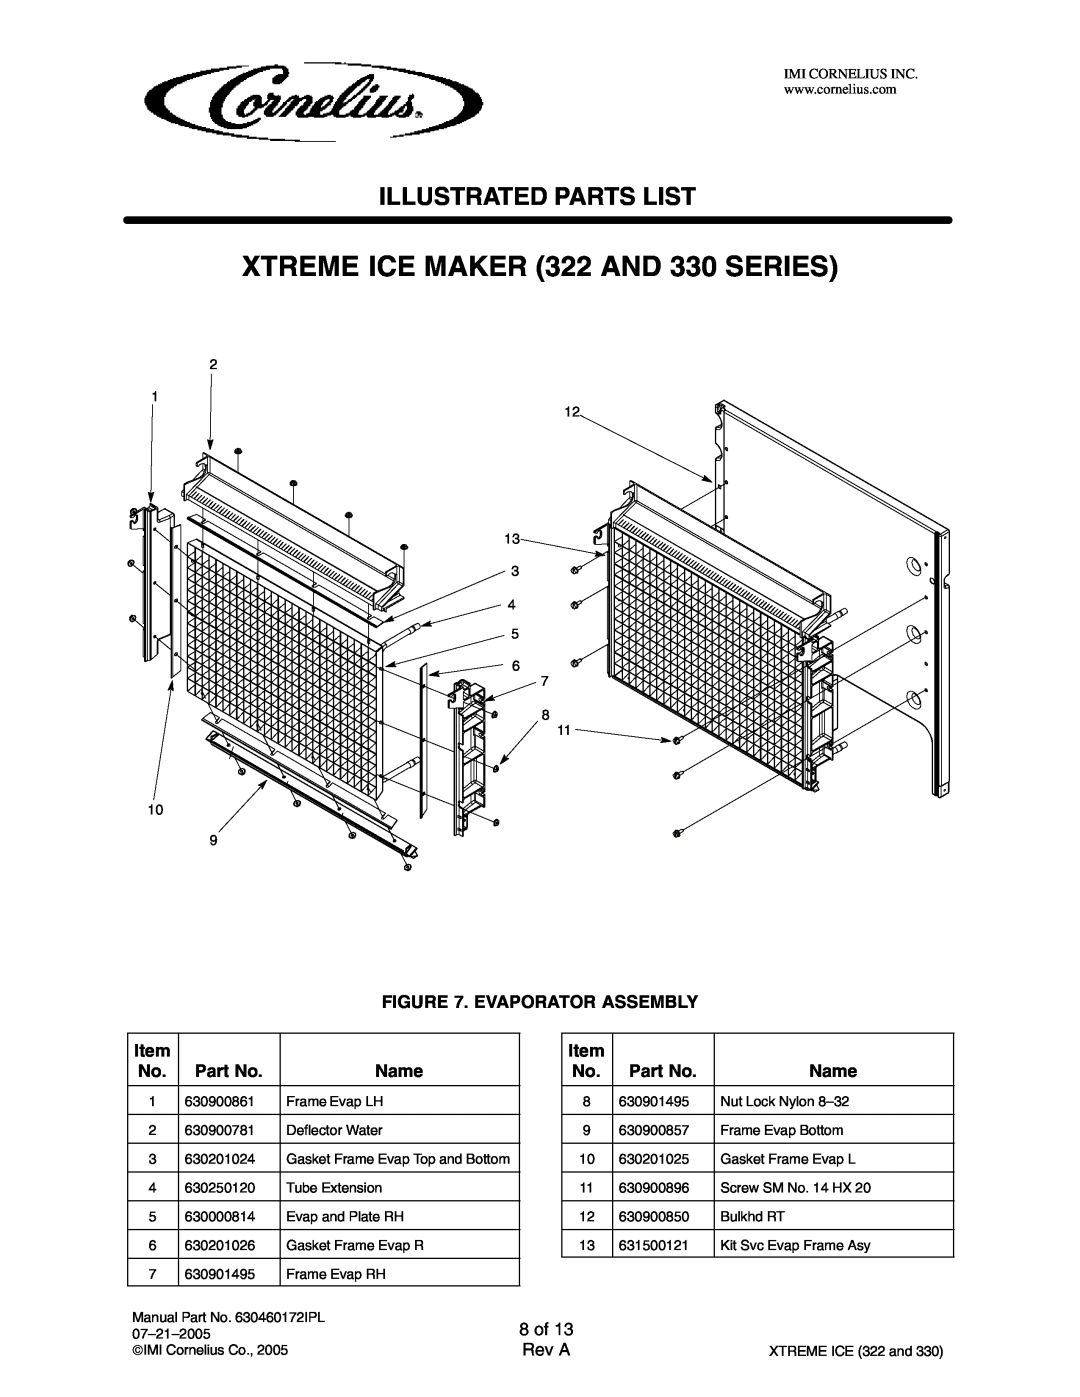 Cornelius 631803001 8 of, XTREME ICE MAKER 322 AND 330 SERIES, Illustrated Parts List, Evaporator Assembly, Name, Rev A 